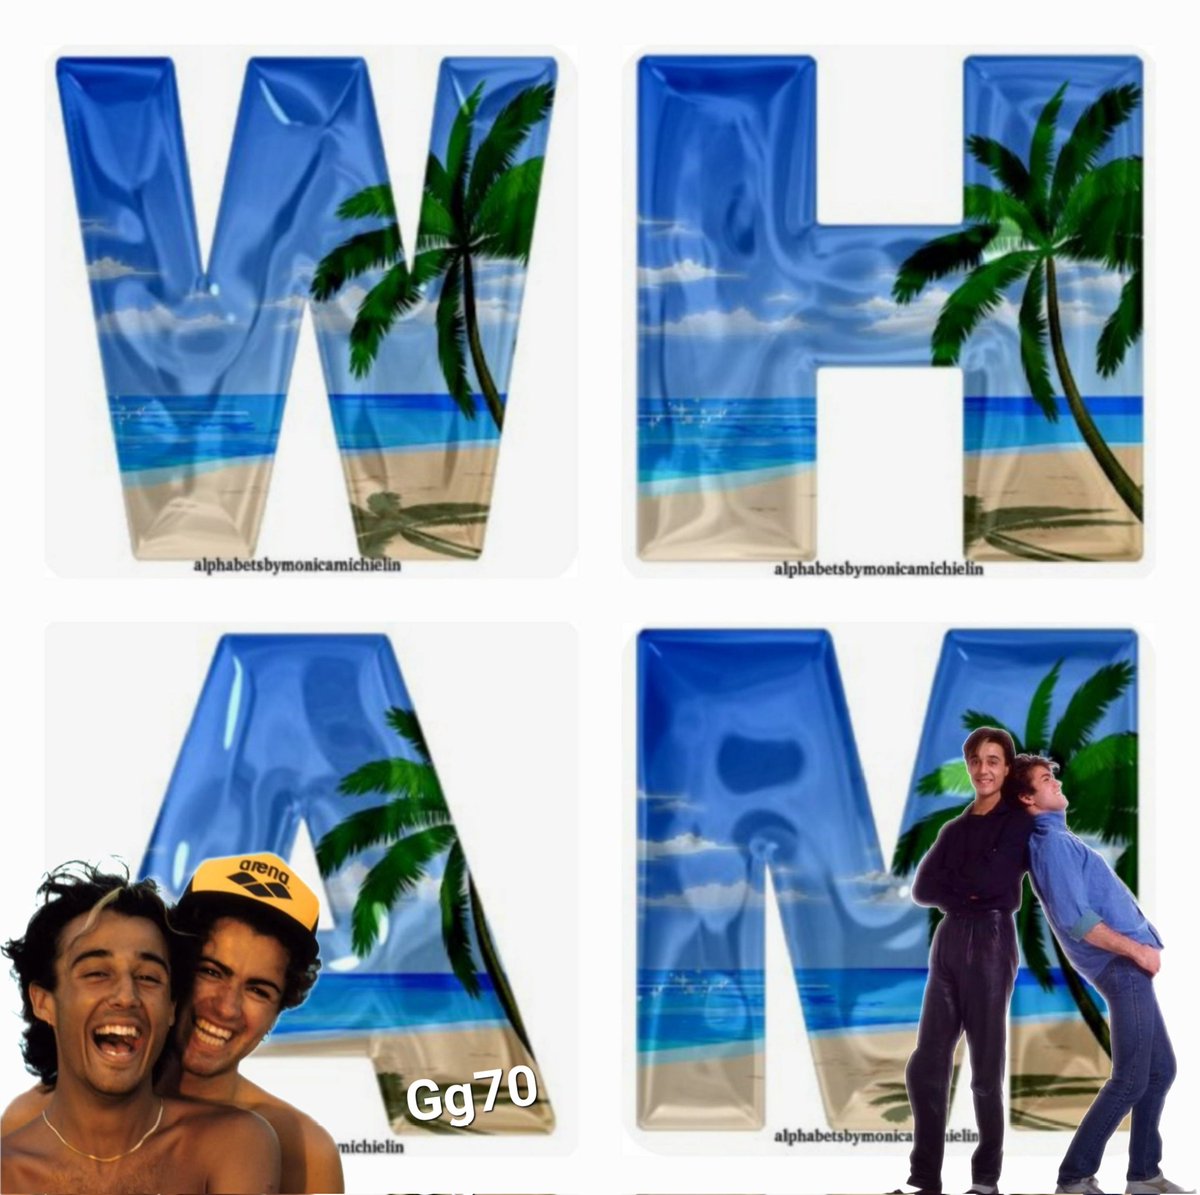 Hope you have a great Wham!sday ❤️🏖🏝
#georgemichael #wham #lovelies